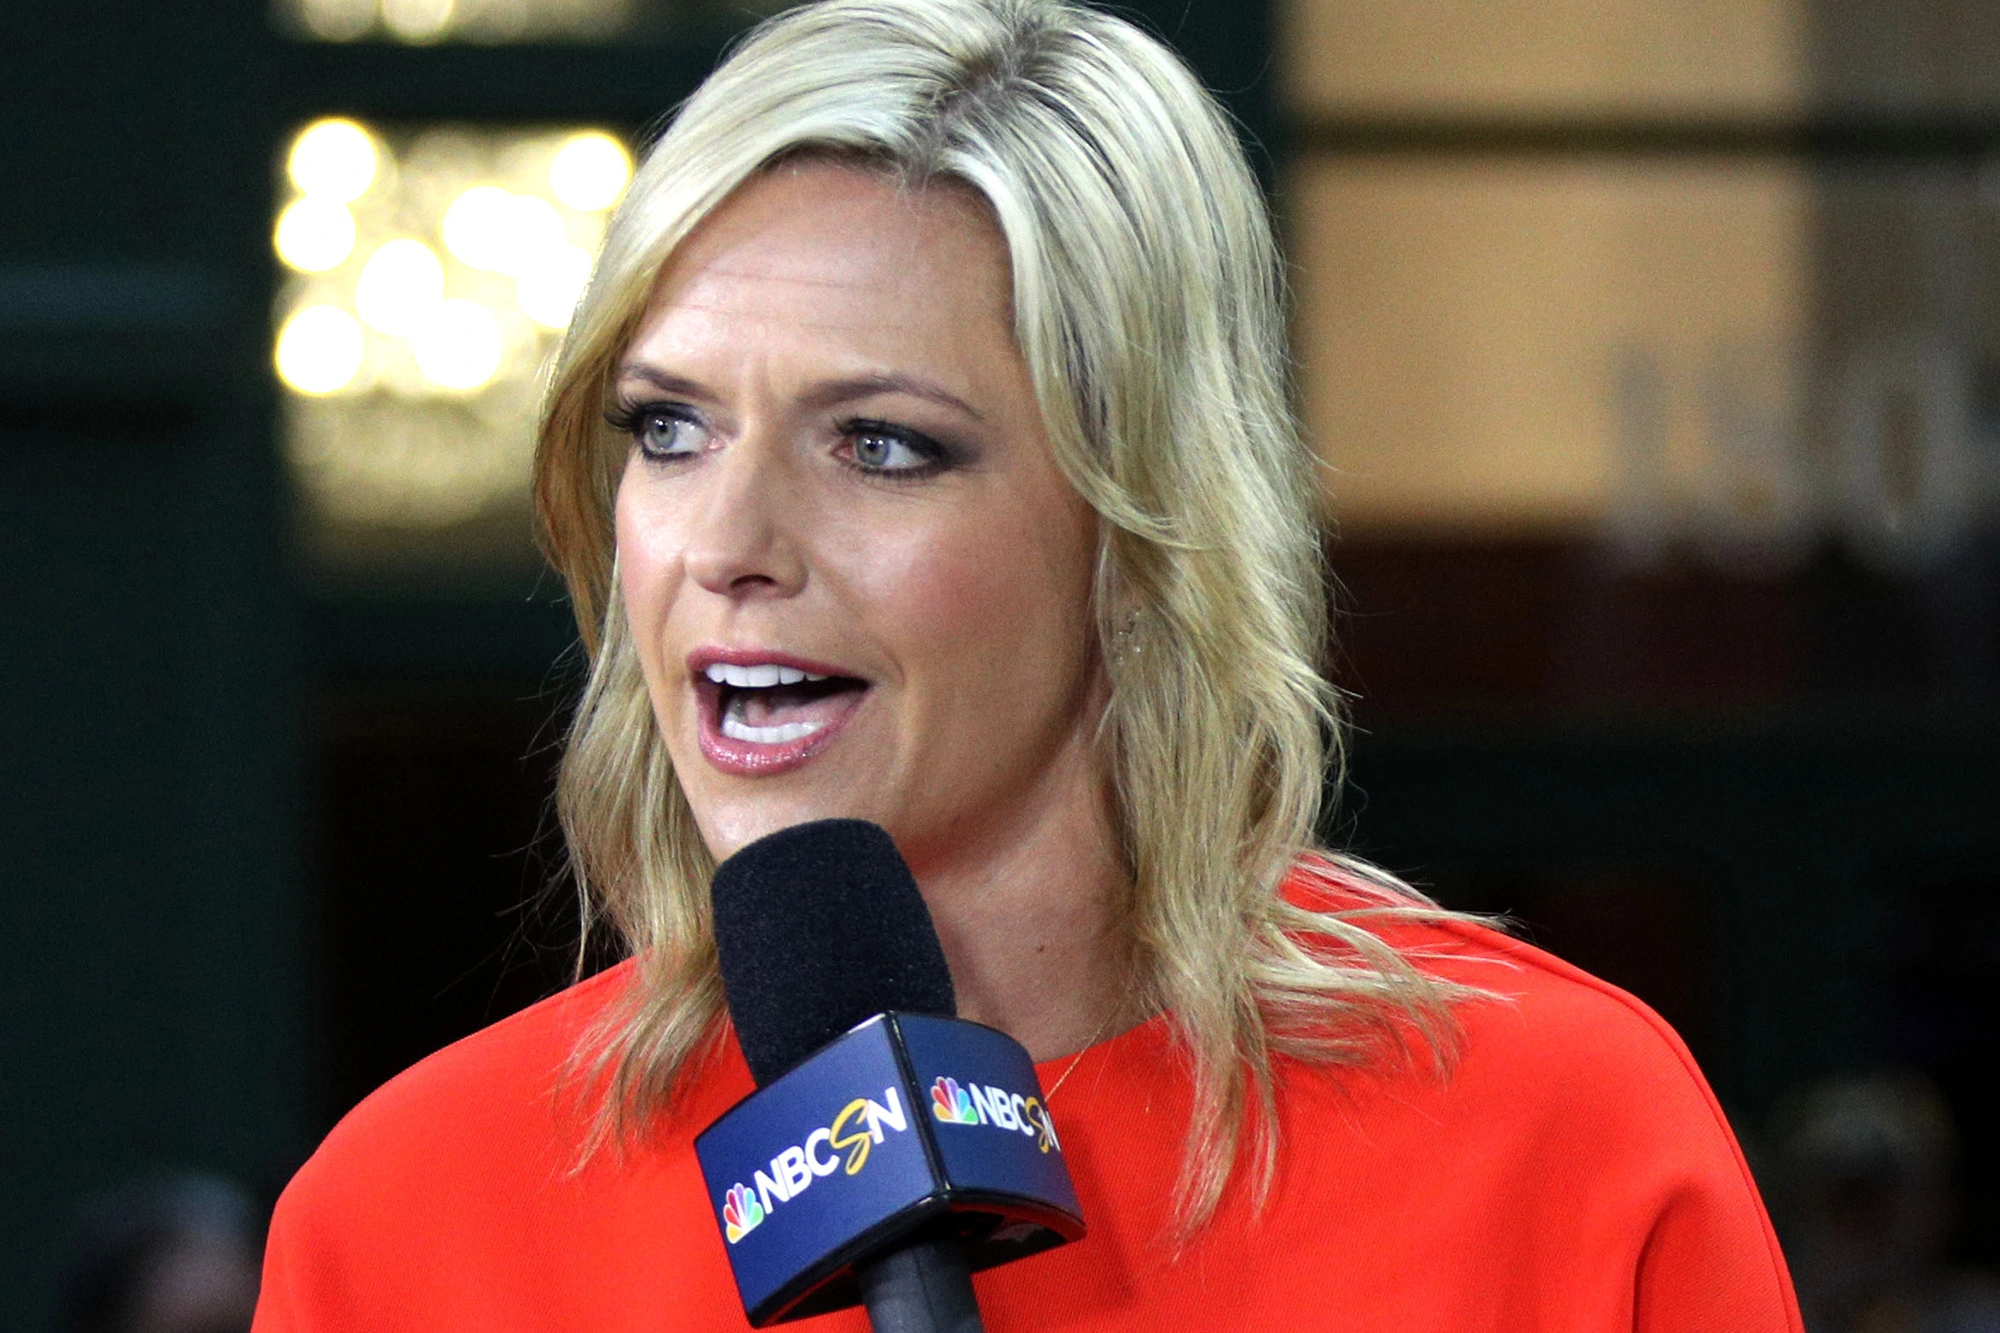 Kathryn Tappen: Biography, Age, Height, Figure, Net Worth